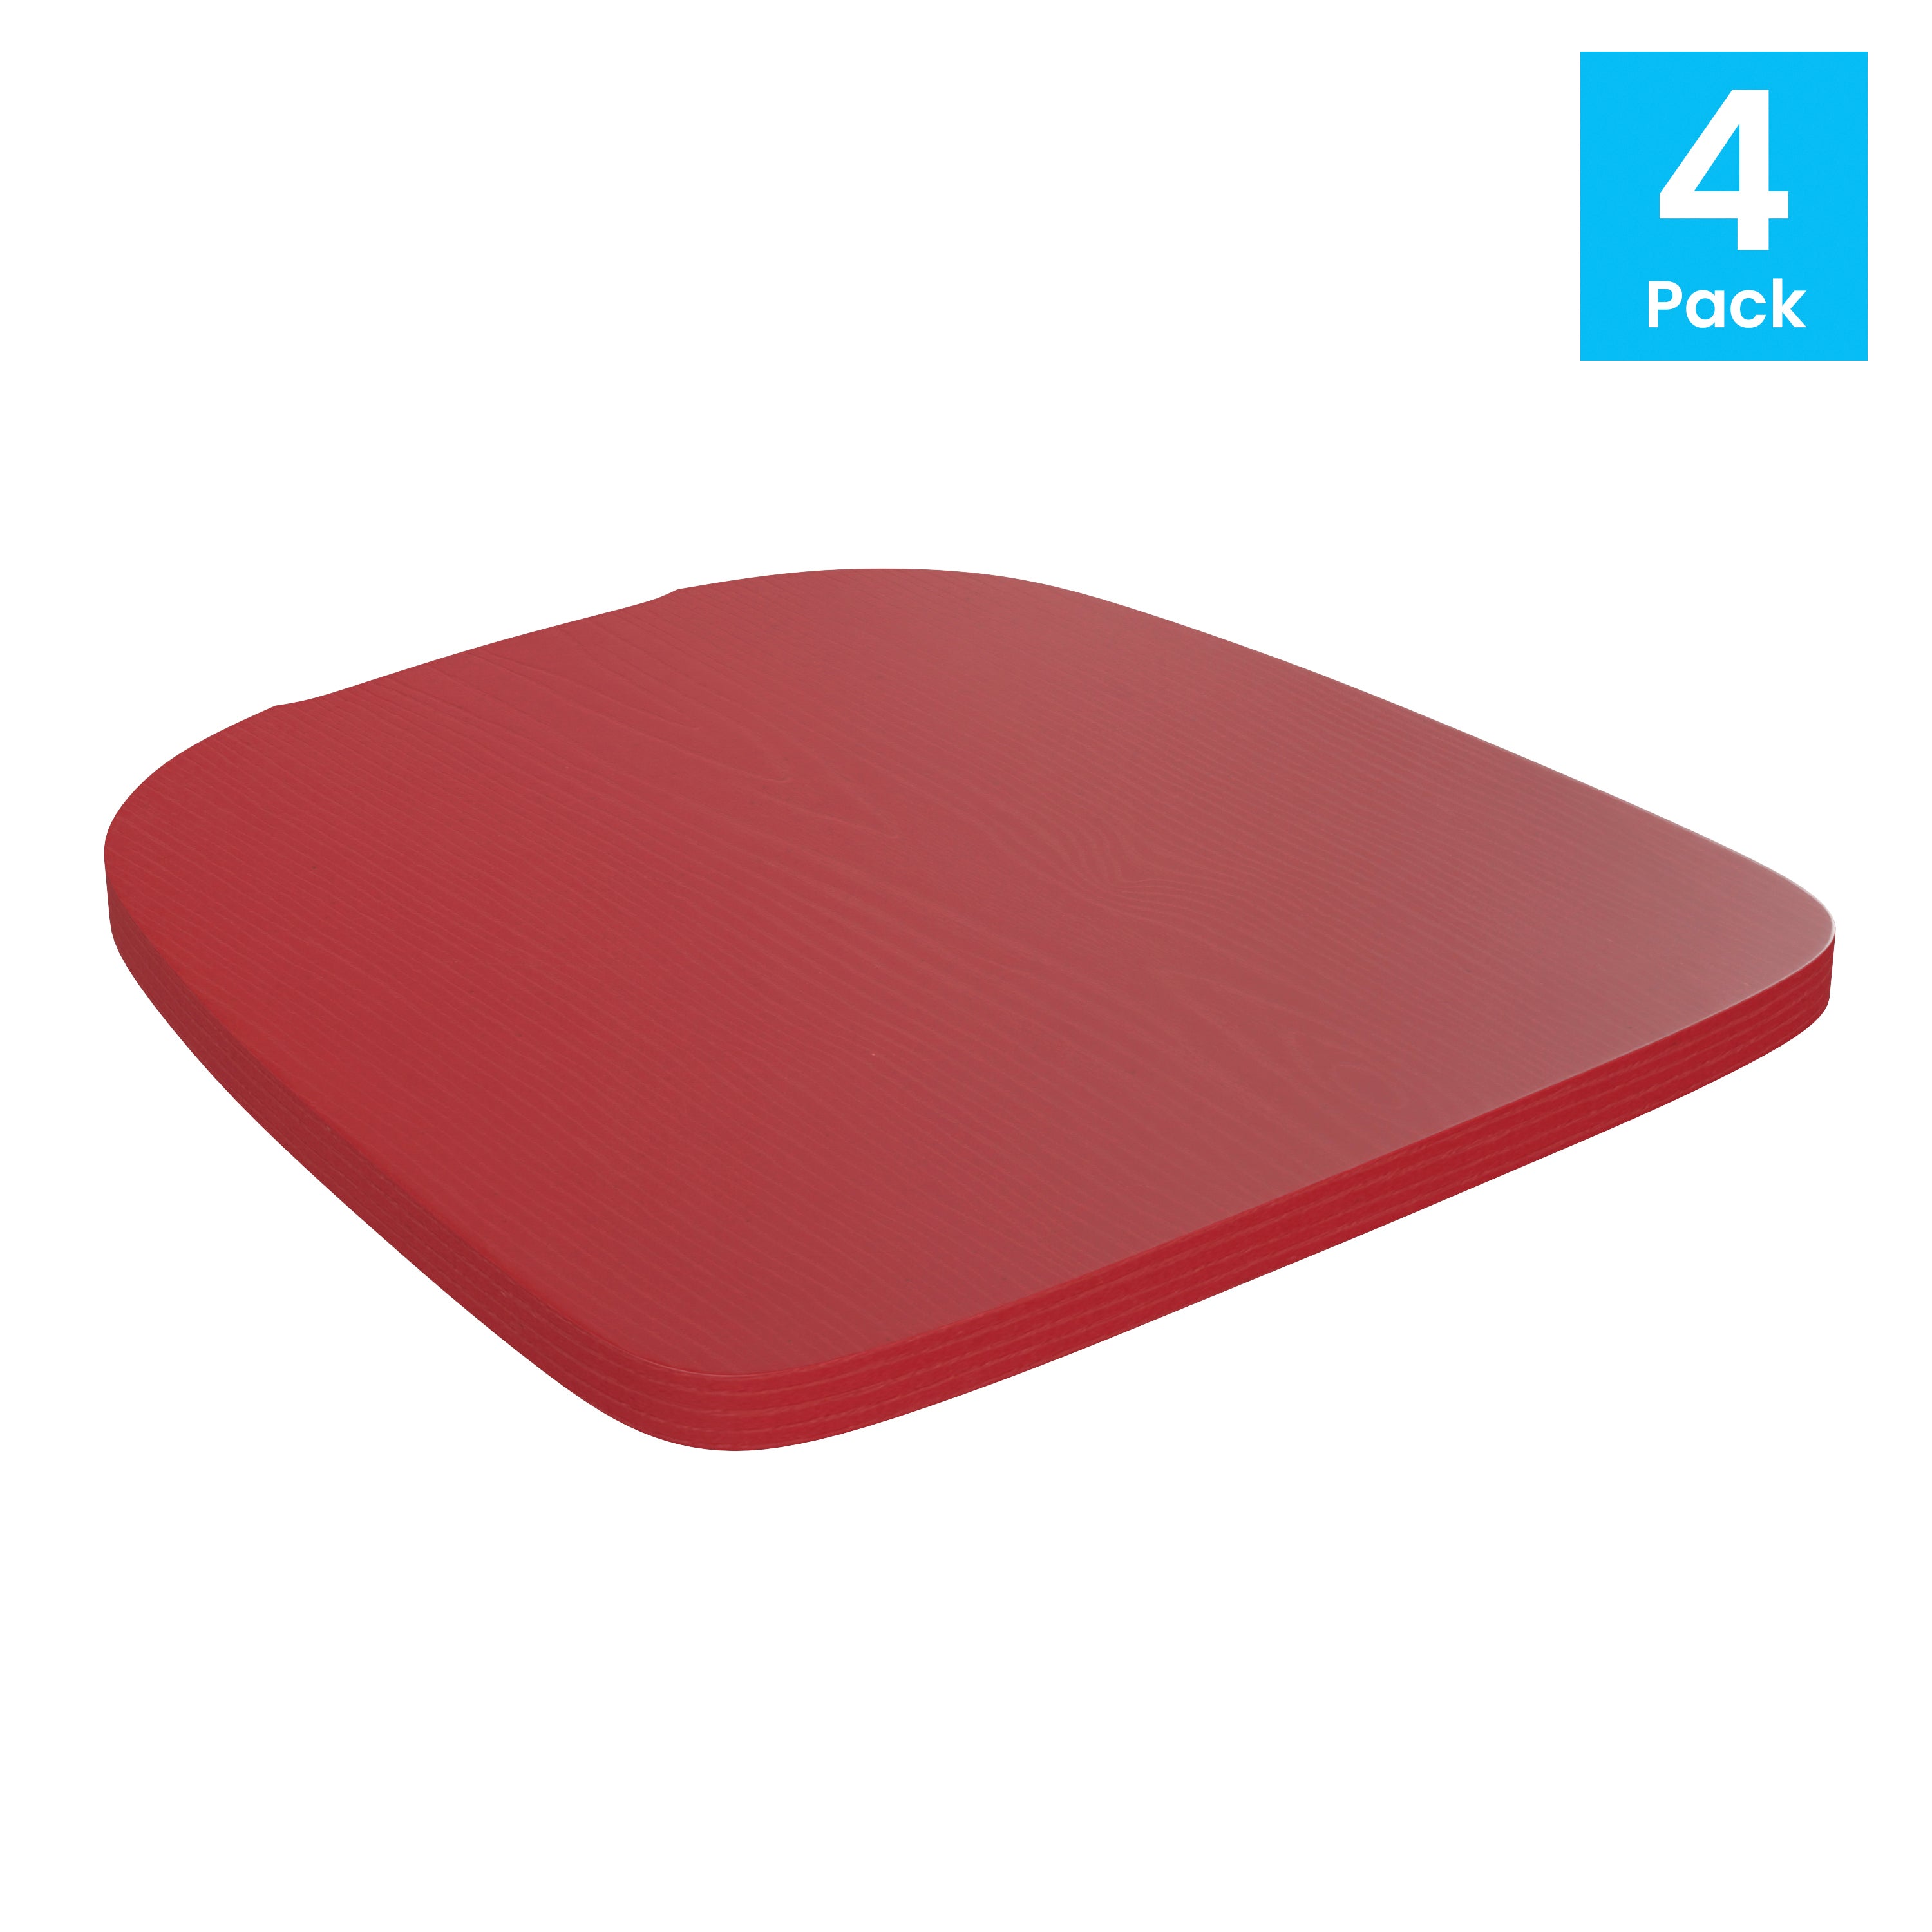 Perry Set of 4 Poly Resin Wood Seat with Rounded Edges for Colorful Metal Chairs and Stools-Colorful Metal Poly Resin Seats-Flash Furniture-Wall2Wall Furnishings